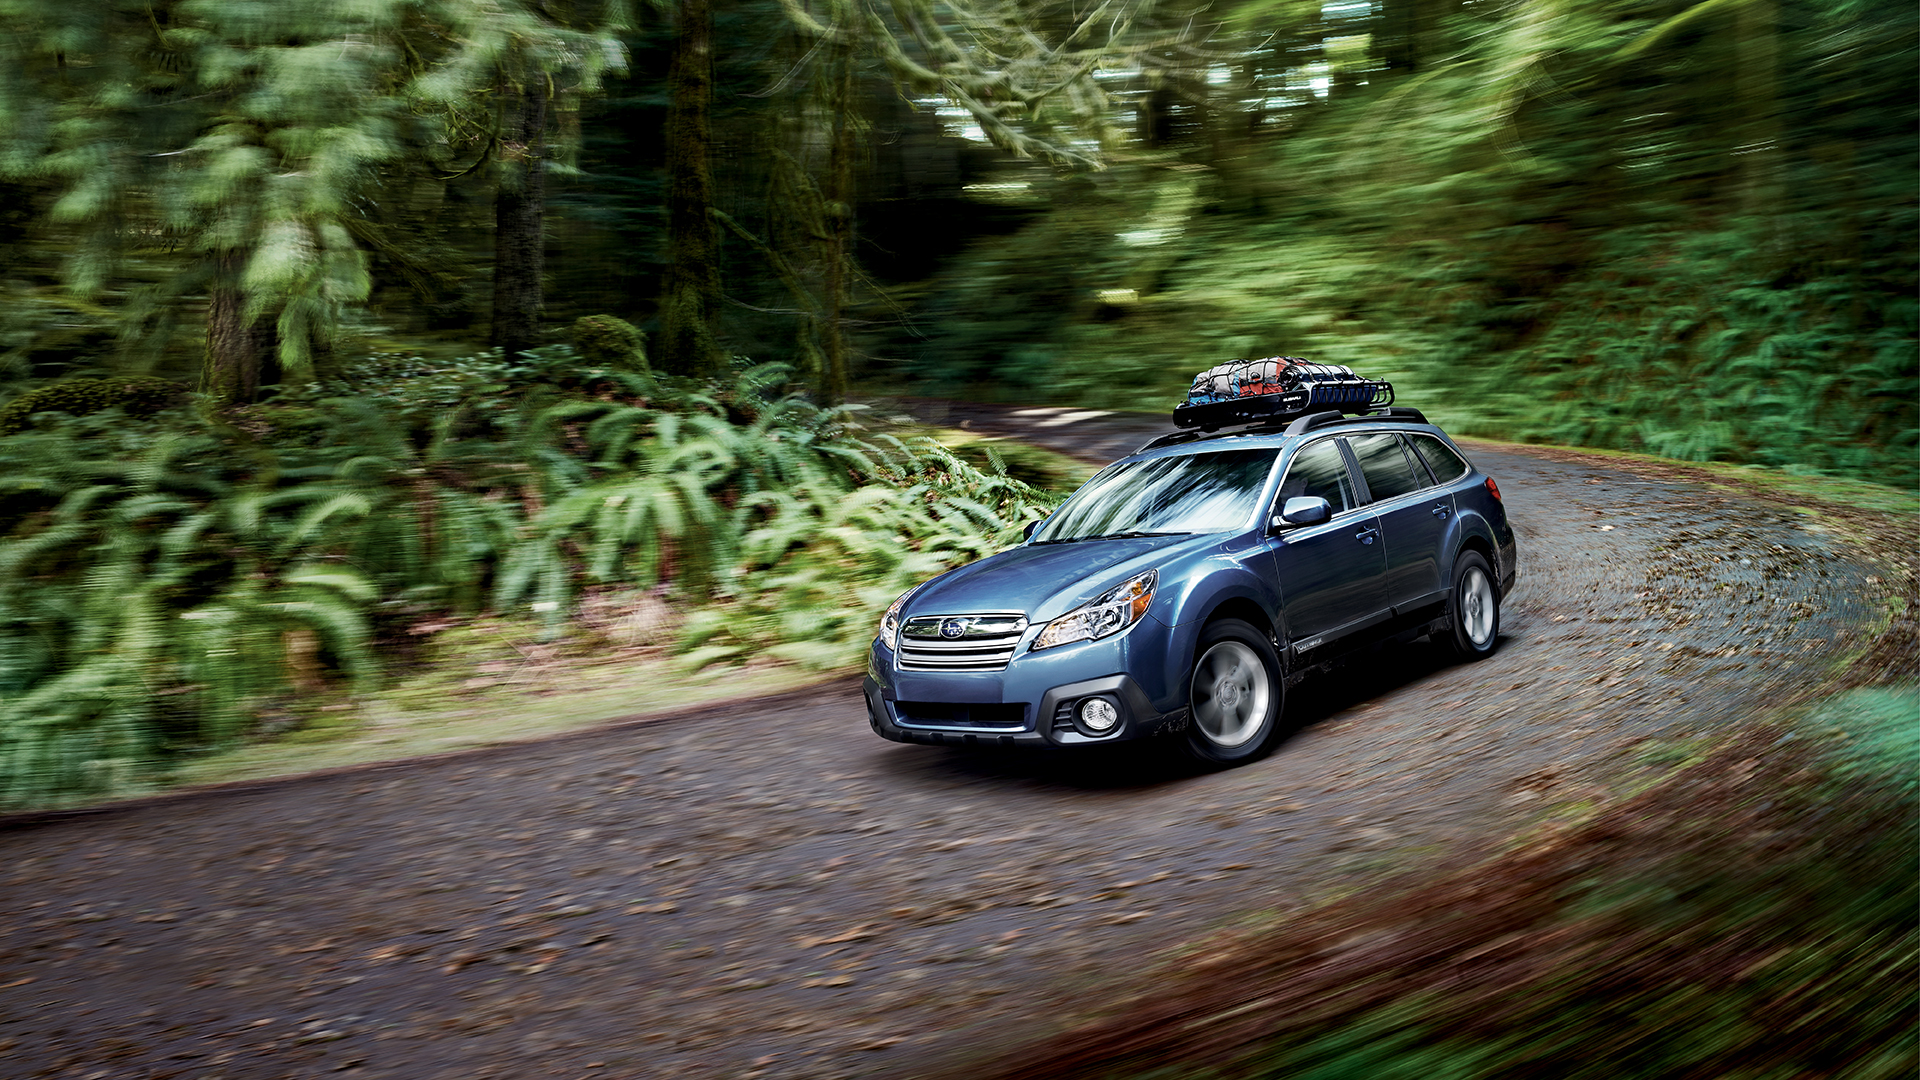 Subaru Outback Wallpaper Forest Road